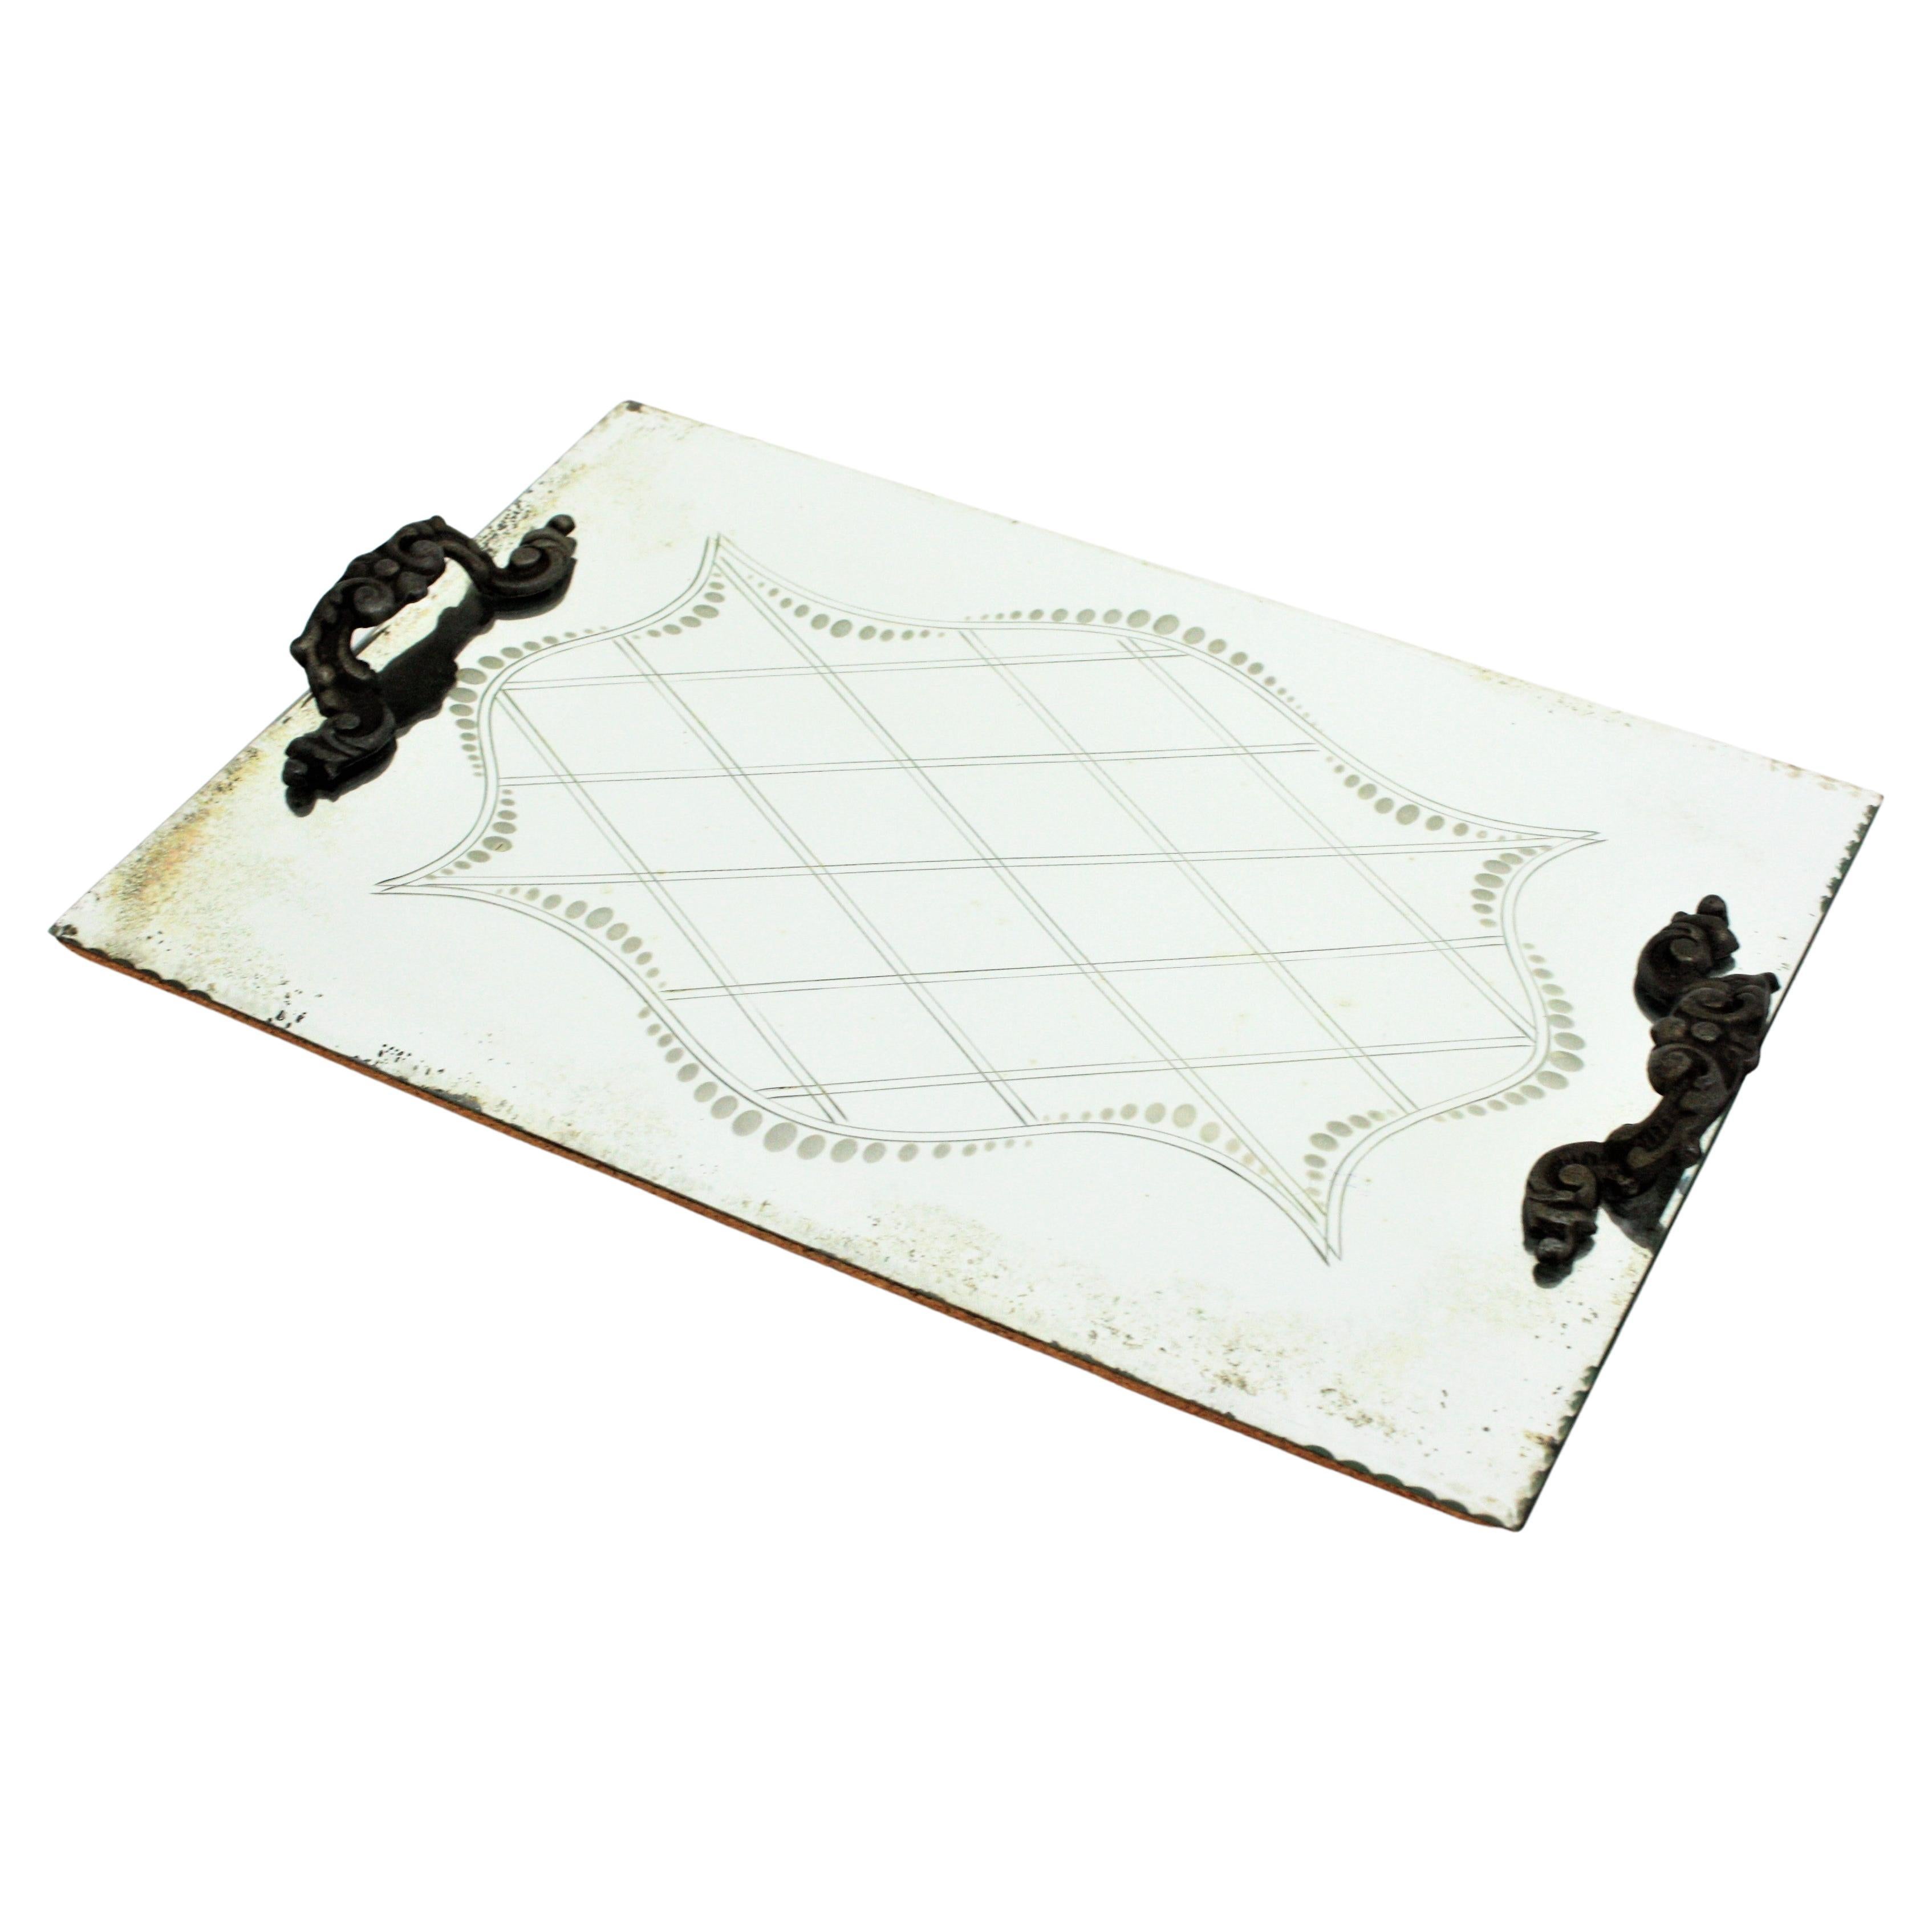 Art Deco mirror tray or vanity tray with engraved geometric motifs and metal handles, Spain, 1930s
The tray has a mirror surface with grid and dots motifs, naturalistic details decorating the handles . It shows a terrific aged patina.
Use it as